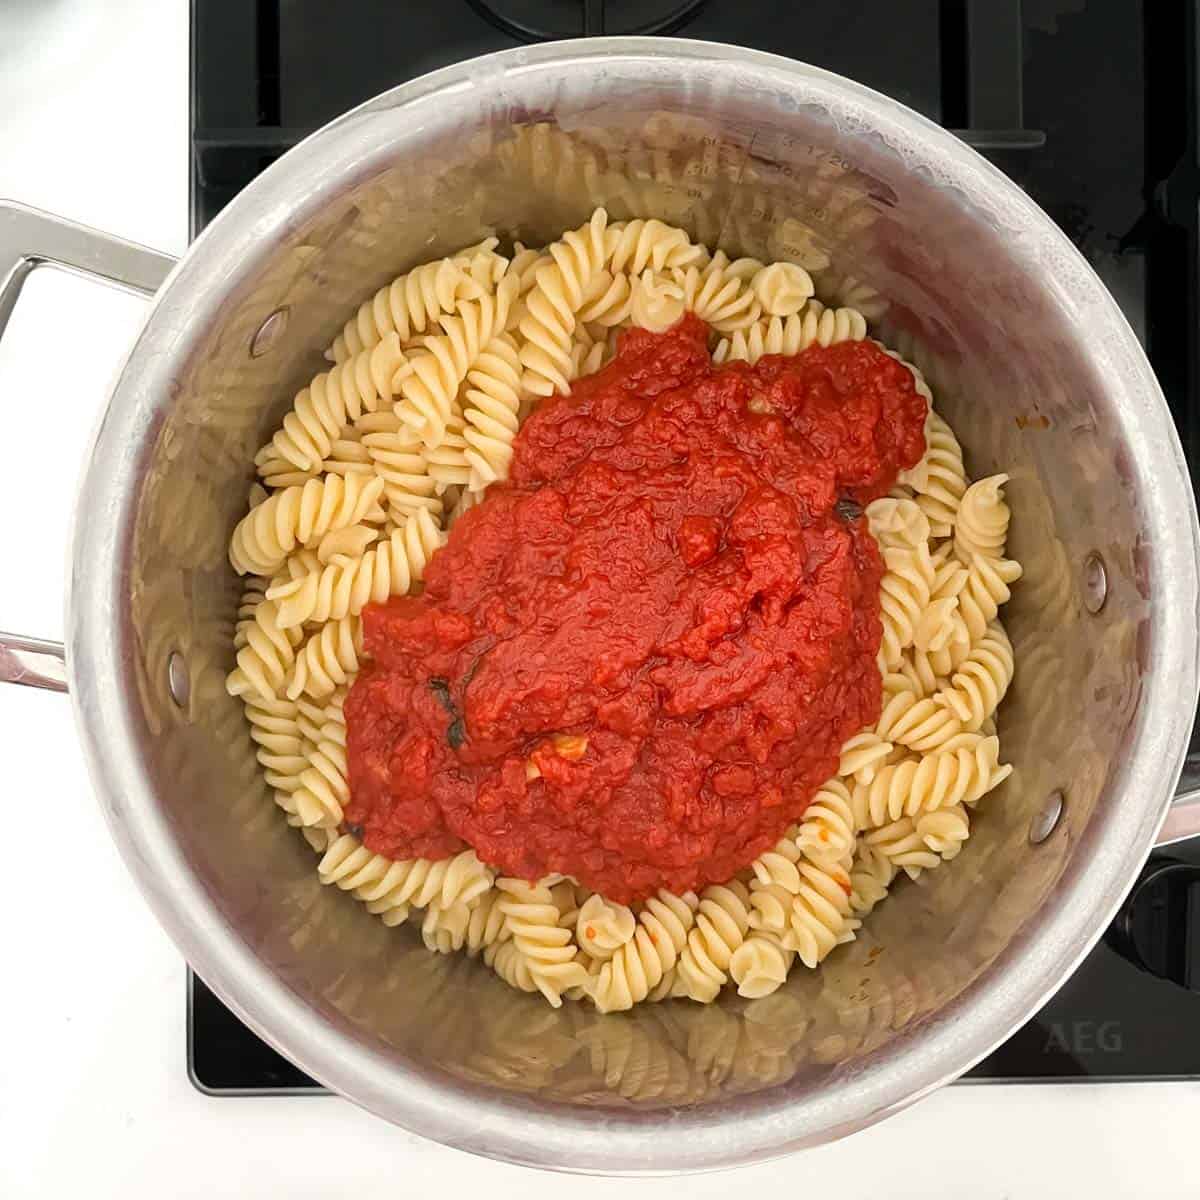 Tomato sauce added to a pan of cooked pasta.